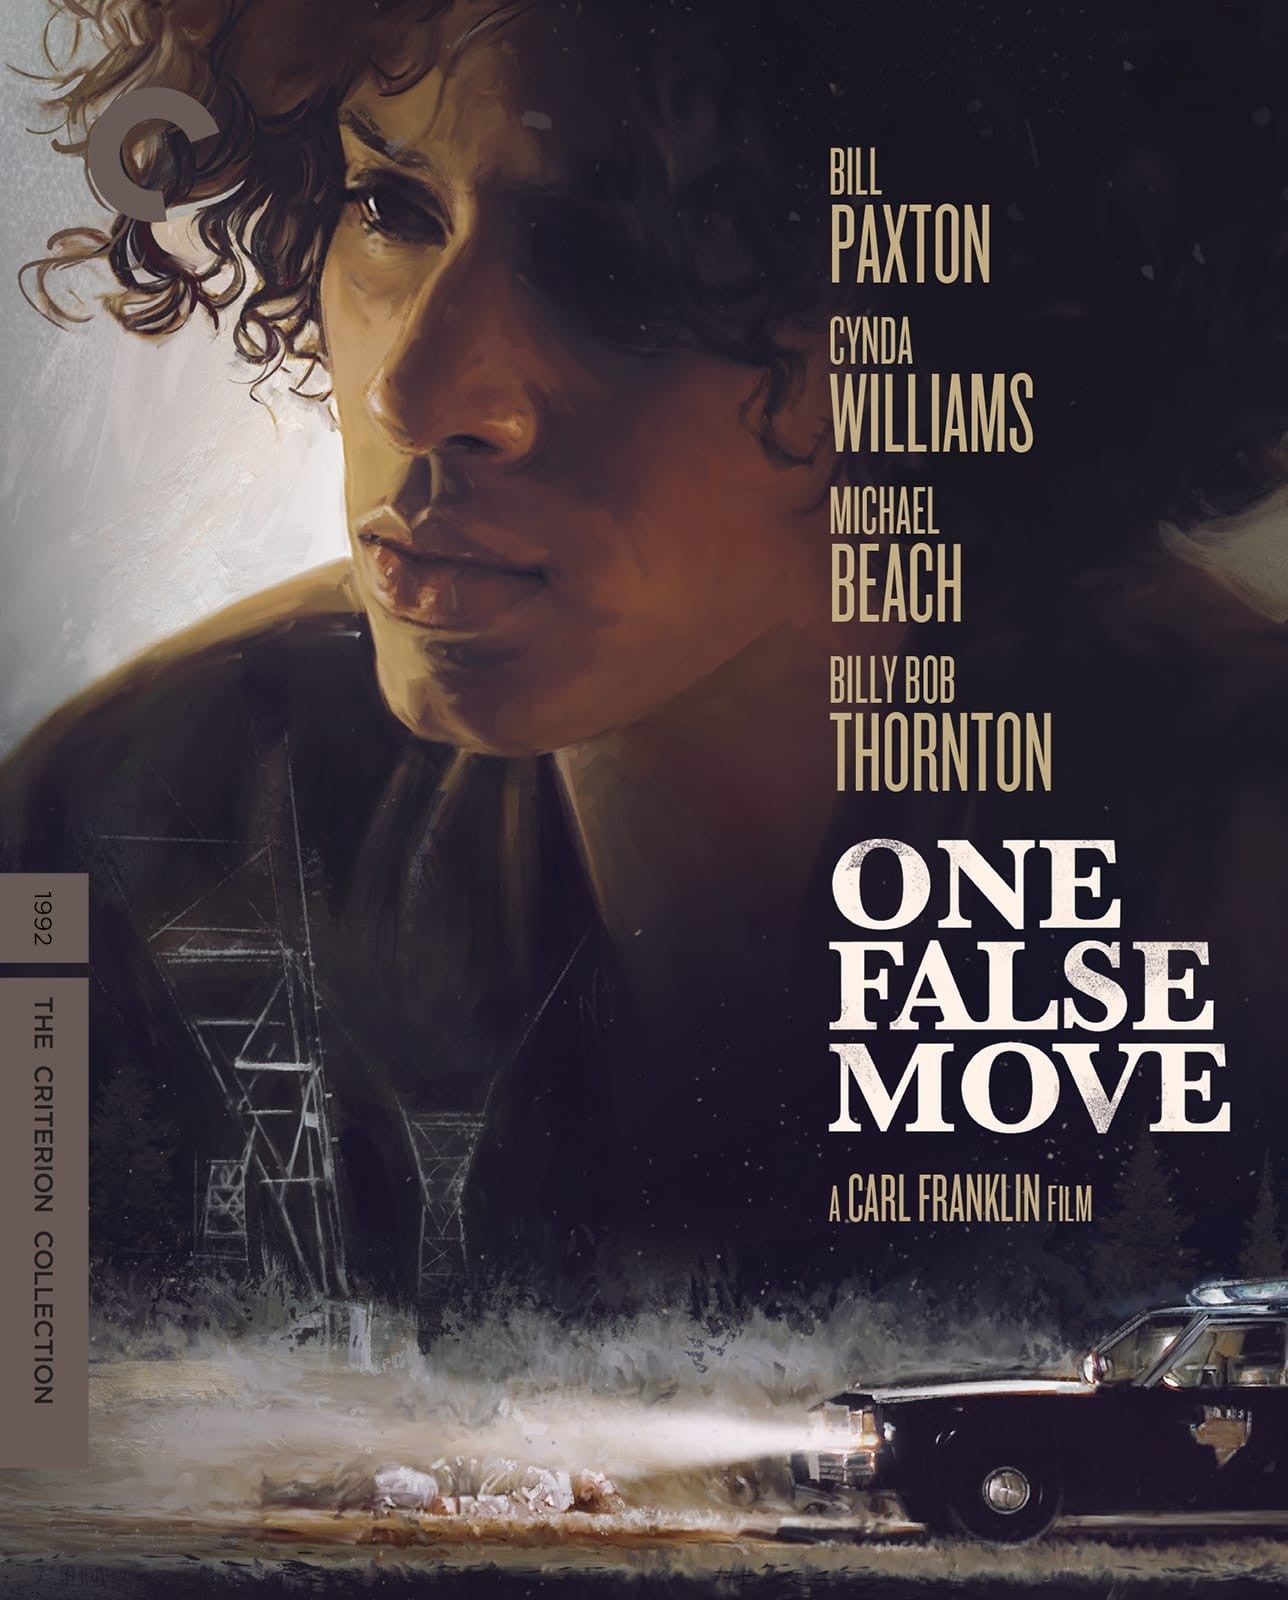 One False Move 4K UHD + Blu-ray (Criterion Collection)